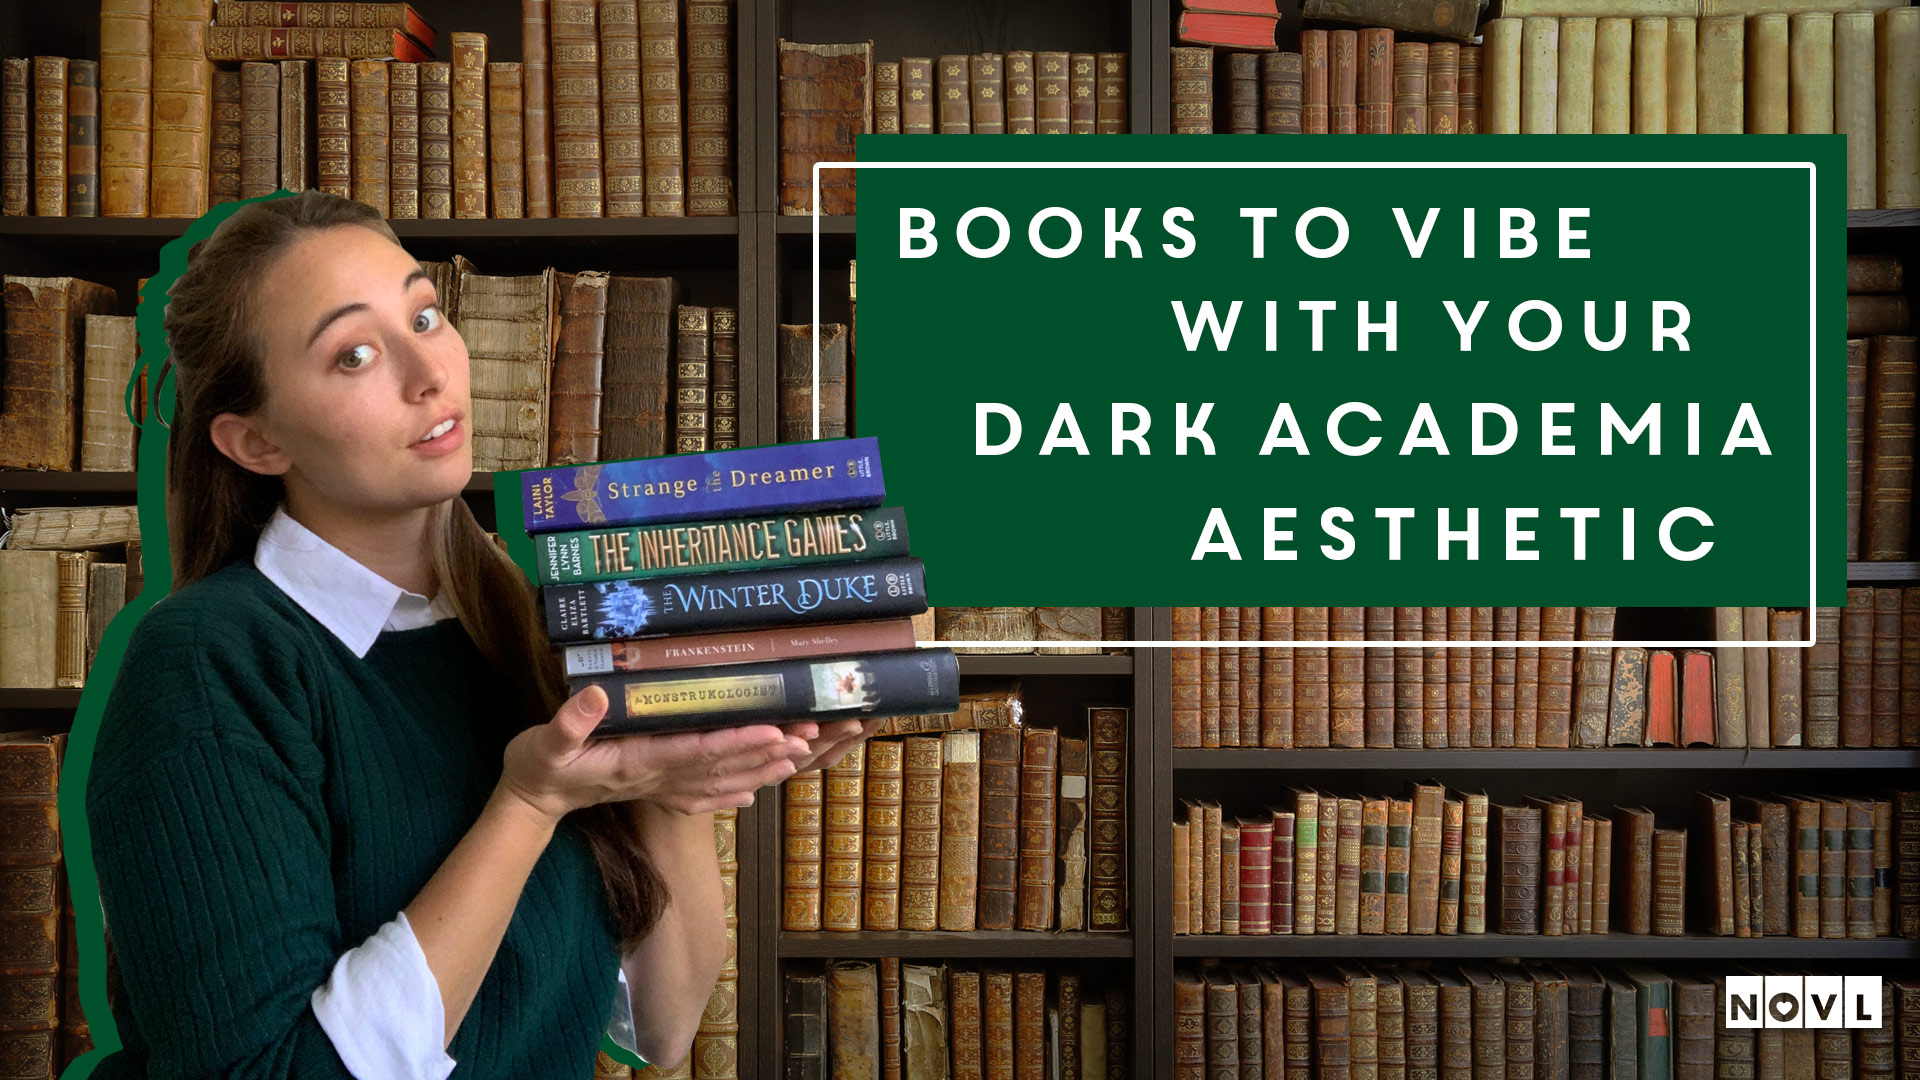 The NOVL Blog, Featured Image for Article: Books to Vibe with your Dark Academia Aesthetic